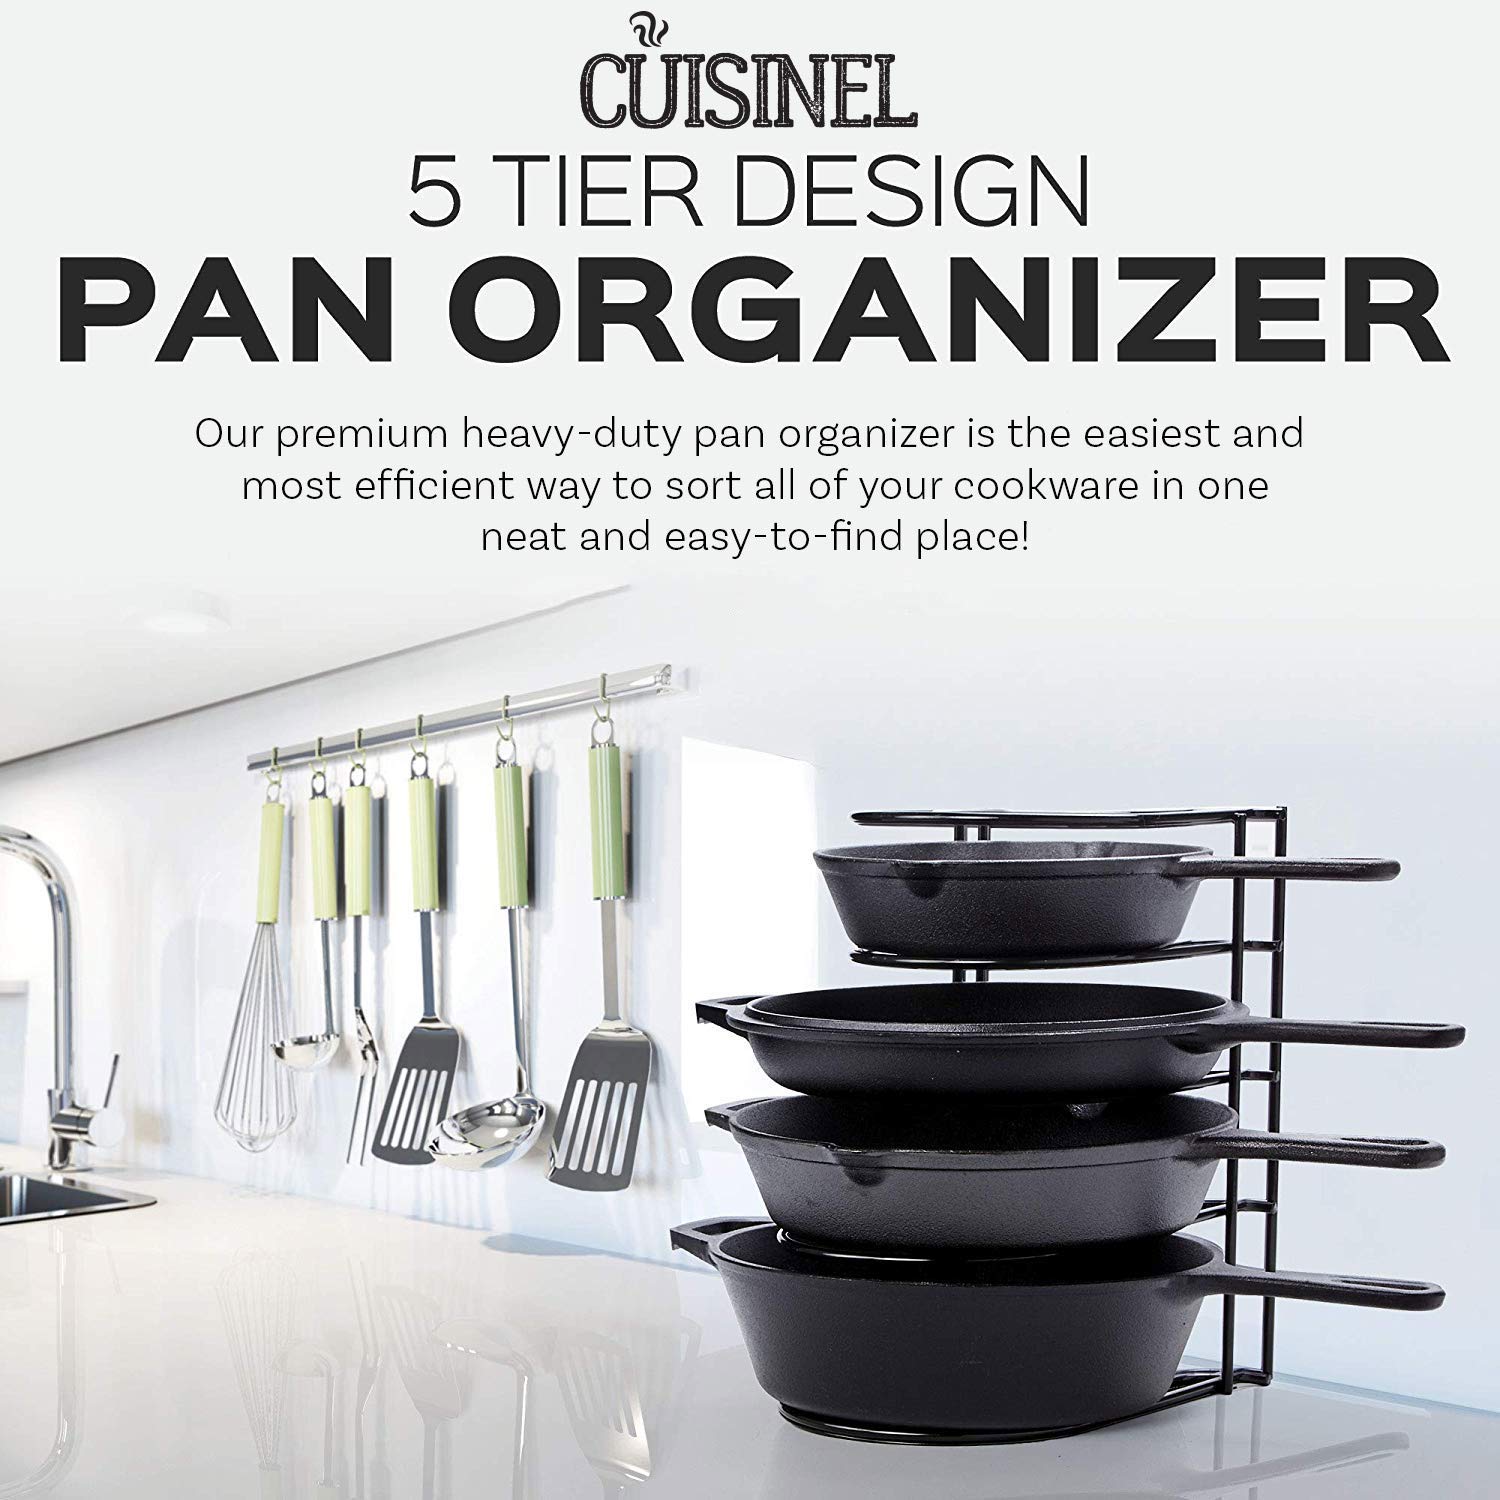 Cuisinel Heavy Duty Pan Organizer - 5 Tier Rack - Holds 50 LB - Holds Cast Iron Skillets, Griddles and Shallow Pots - Durable Steel Construction - Space Saving Kitchen Storage - No Assembly Required